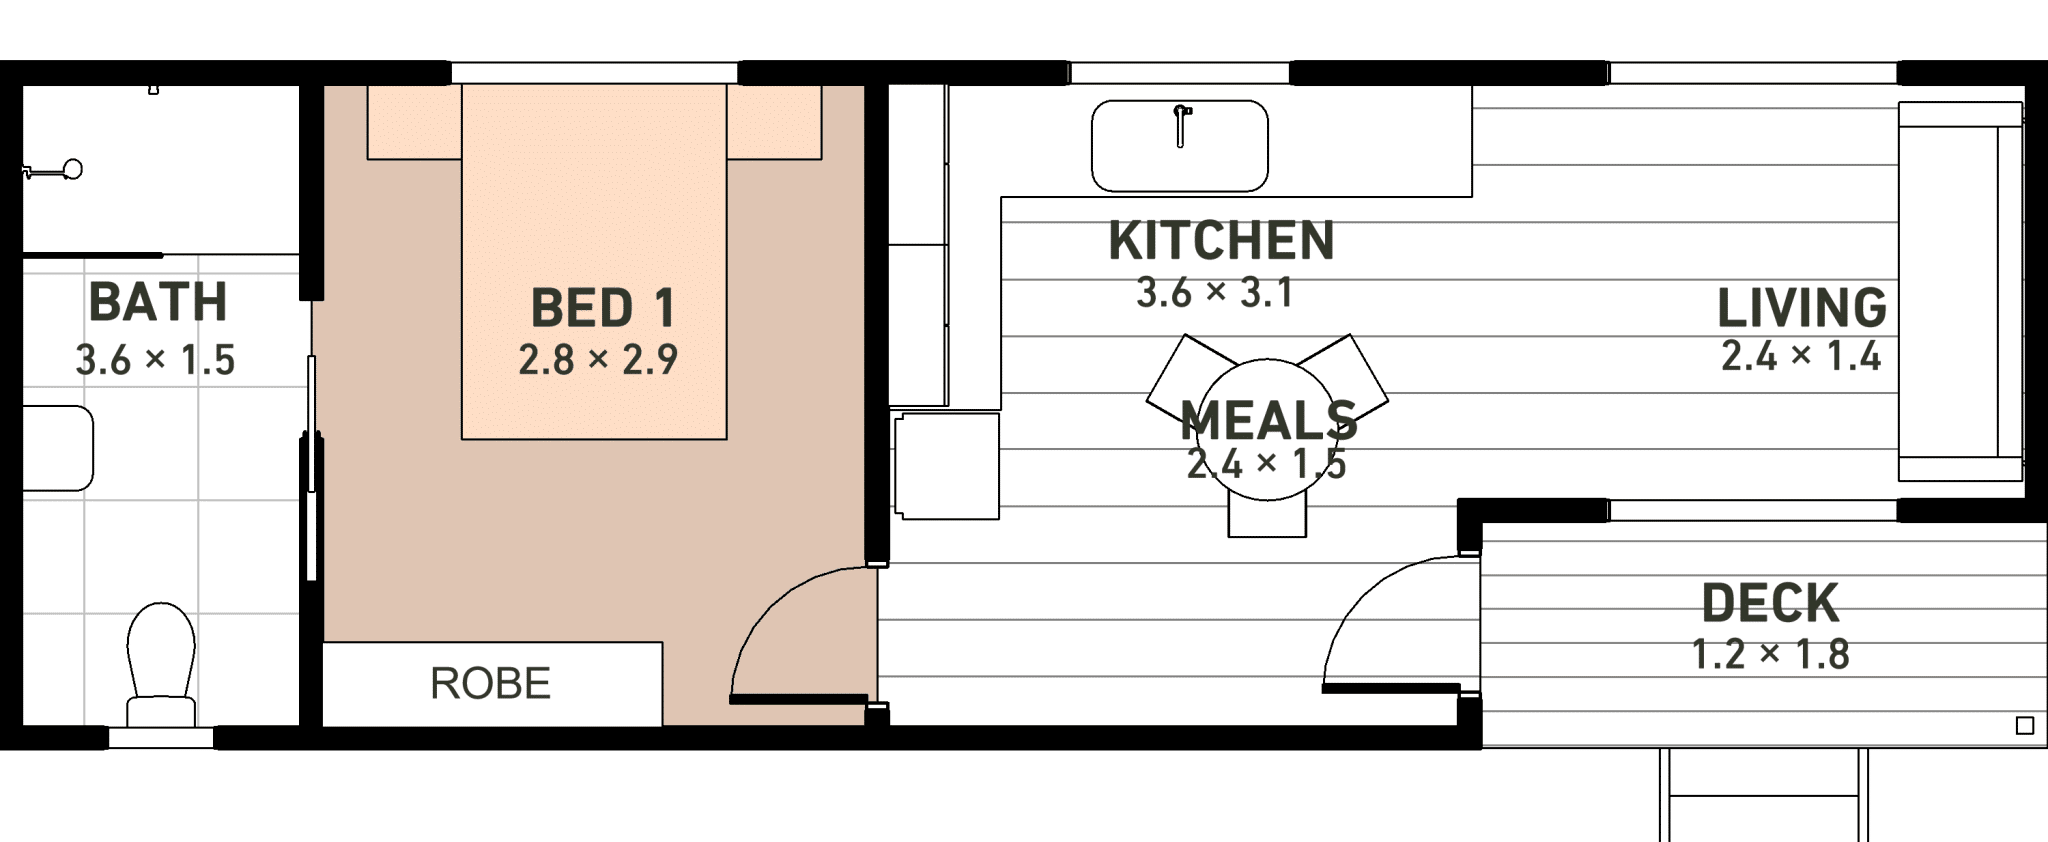 The Kurrajong 11 modular home, a one-bedroom, one-bathroom unit measuring 10.8m x 3.6m, offering a compact yet comfortable living space.